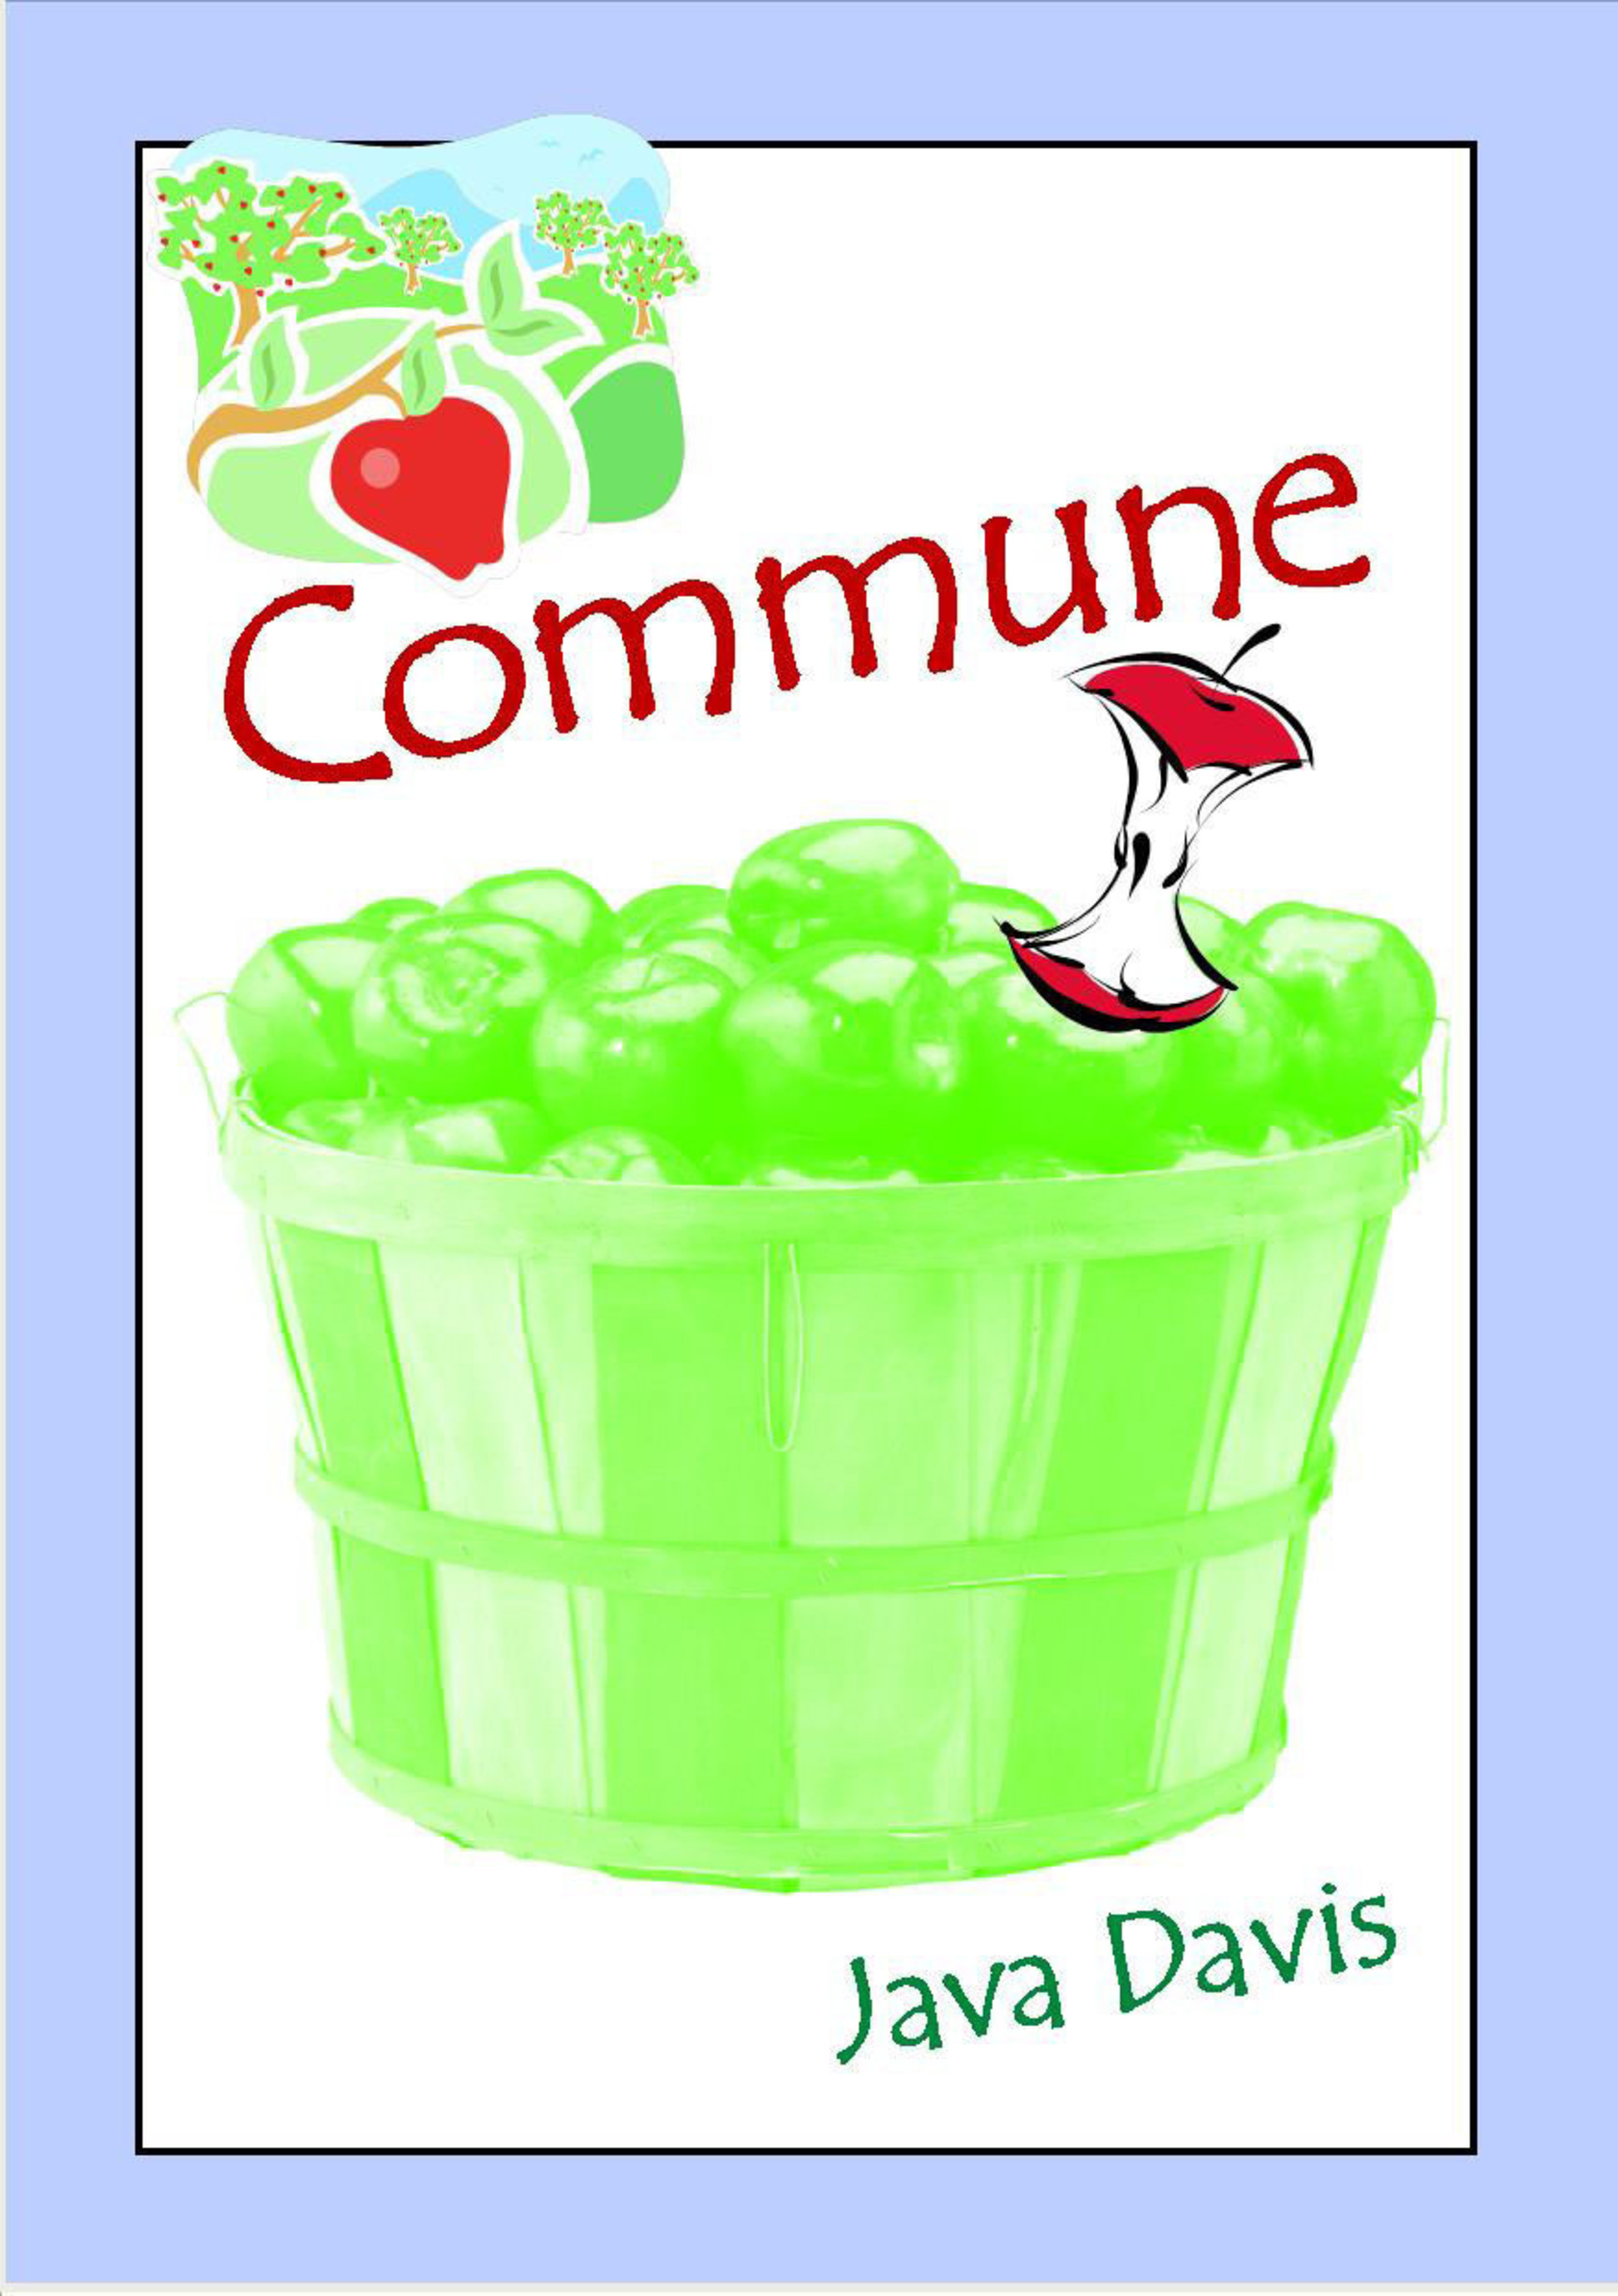 Commune, by Java Davis, will be released on January 31st, 2014. (PRNewsFoto/Java Davis) (PRNewsFoto/JAVA DAVIS)